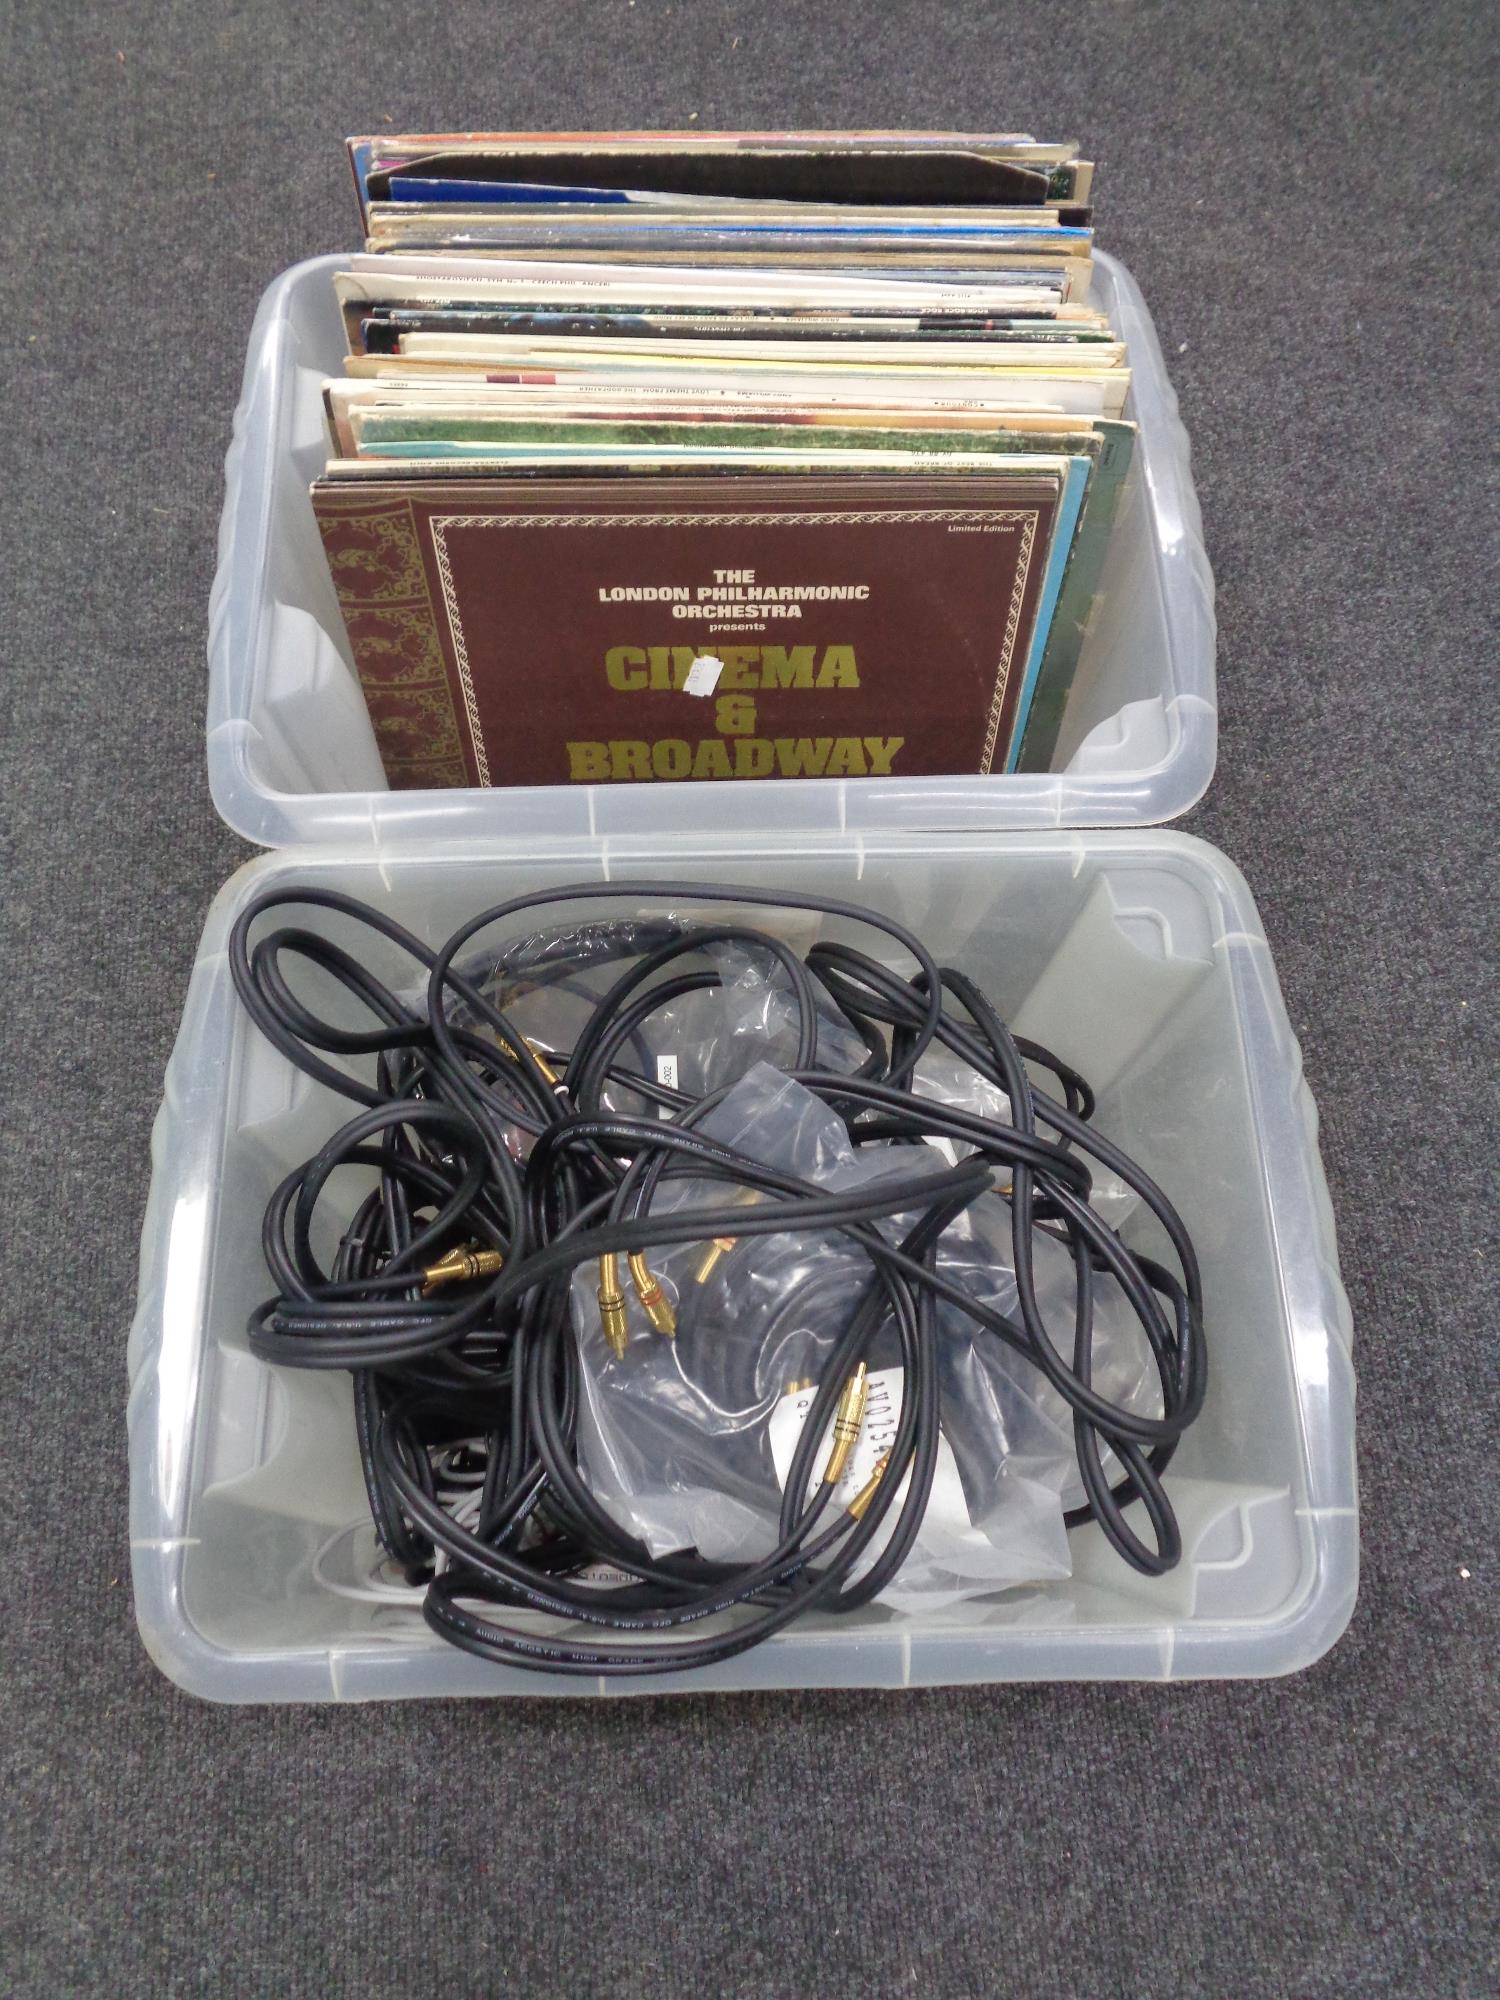 Two boxes containing vintage Defiant radio, large quantity of Hi-Fi cables, quantity of LP records,